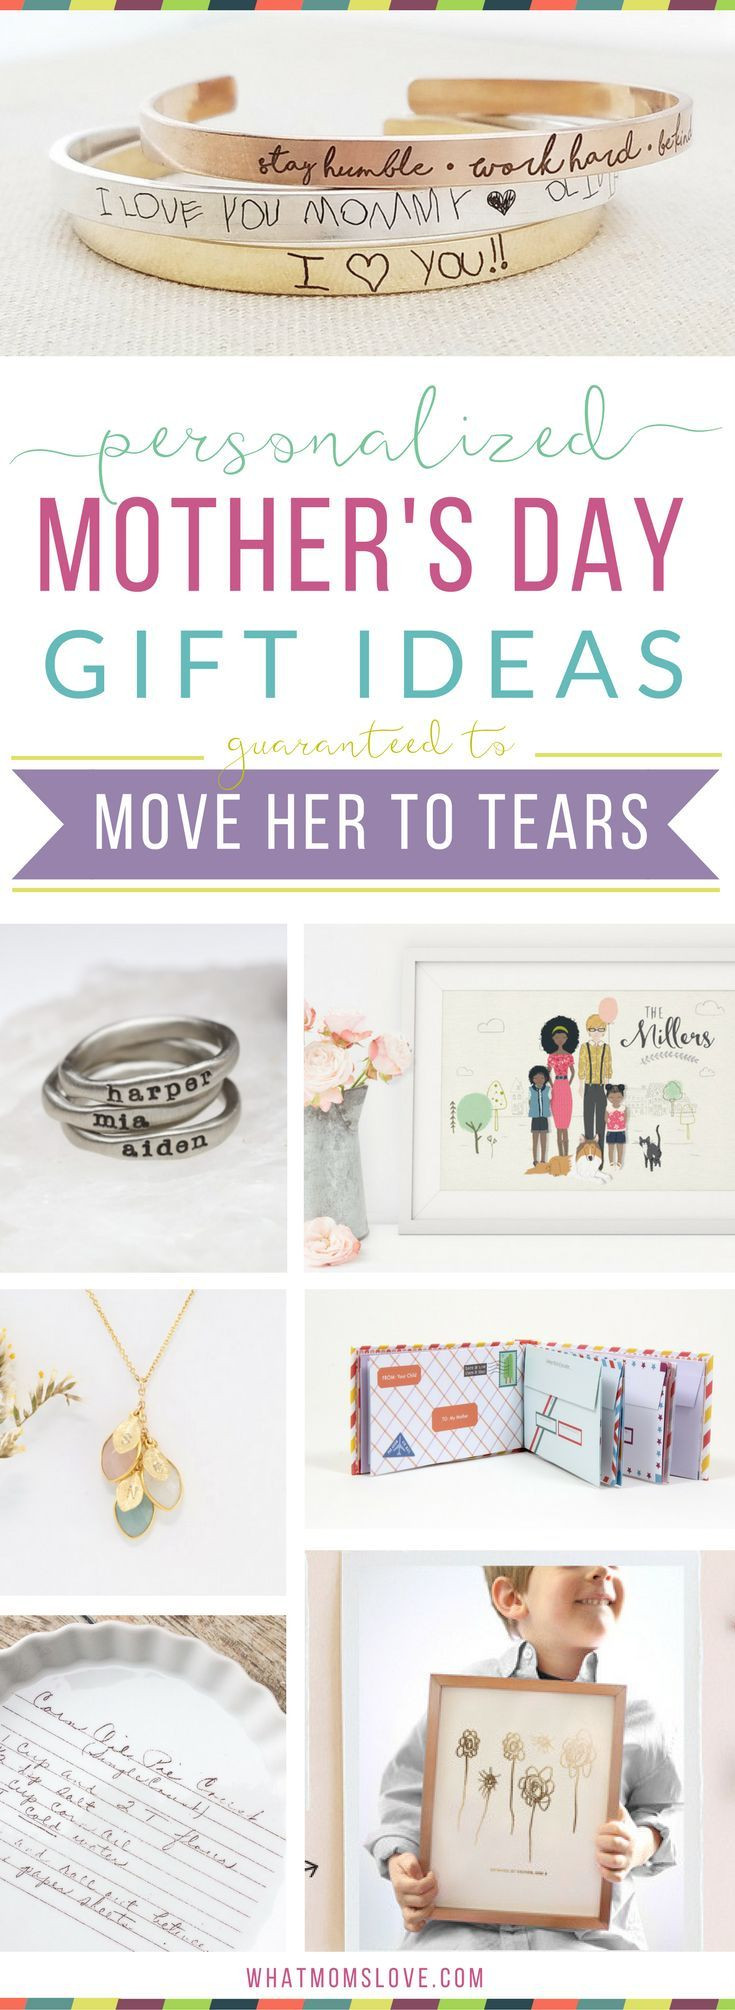 Personalized Mother'S Day Gift Ideas
 495 best Make for Moms or Grandmas images on Pinterest